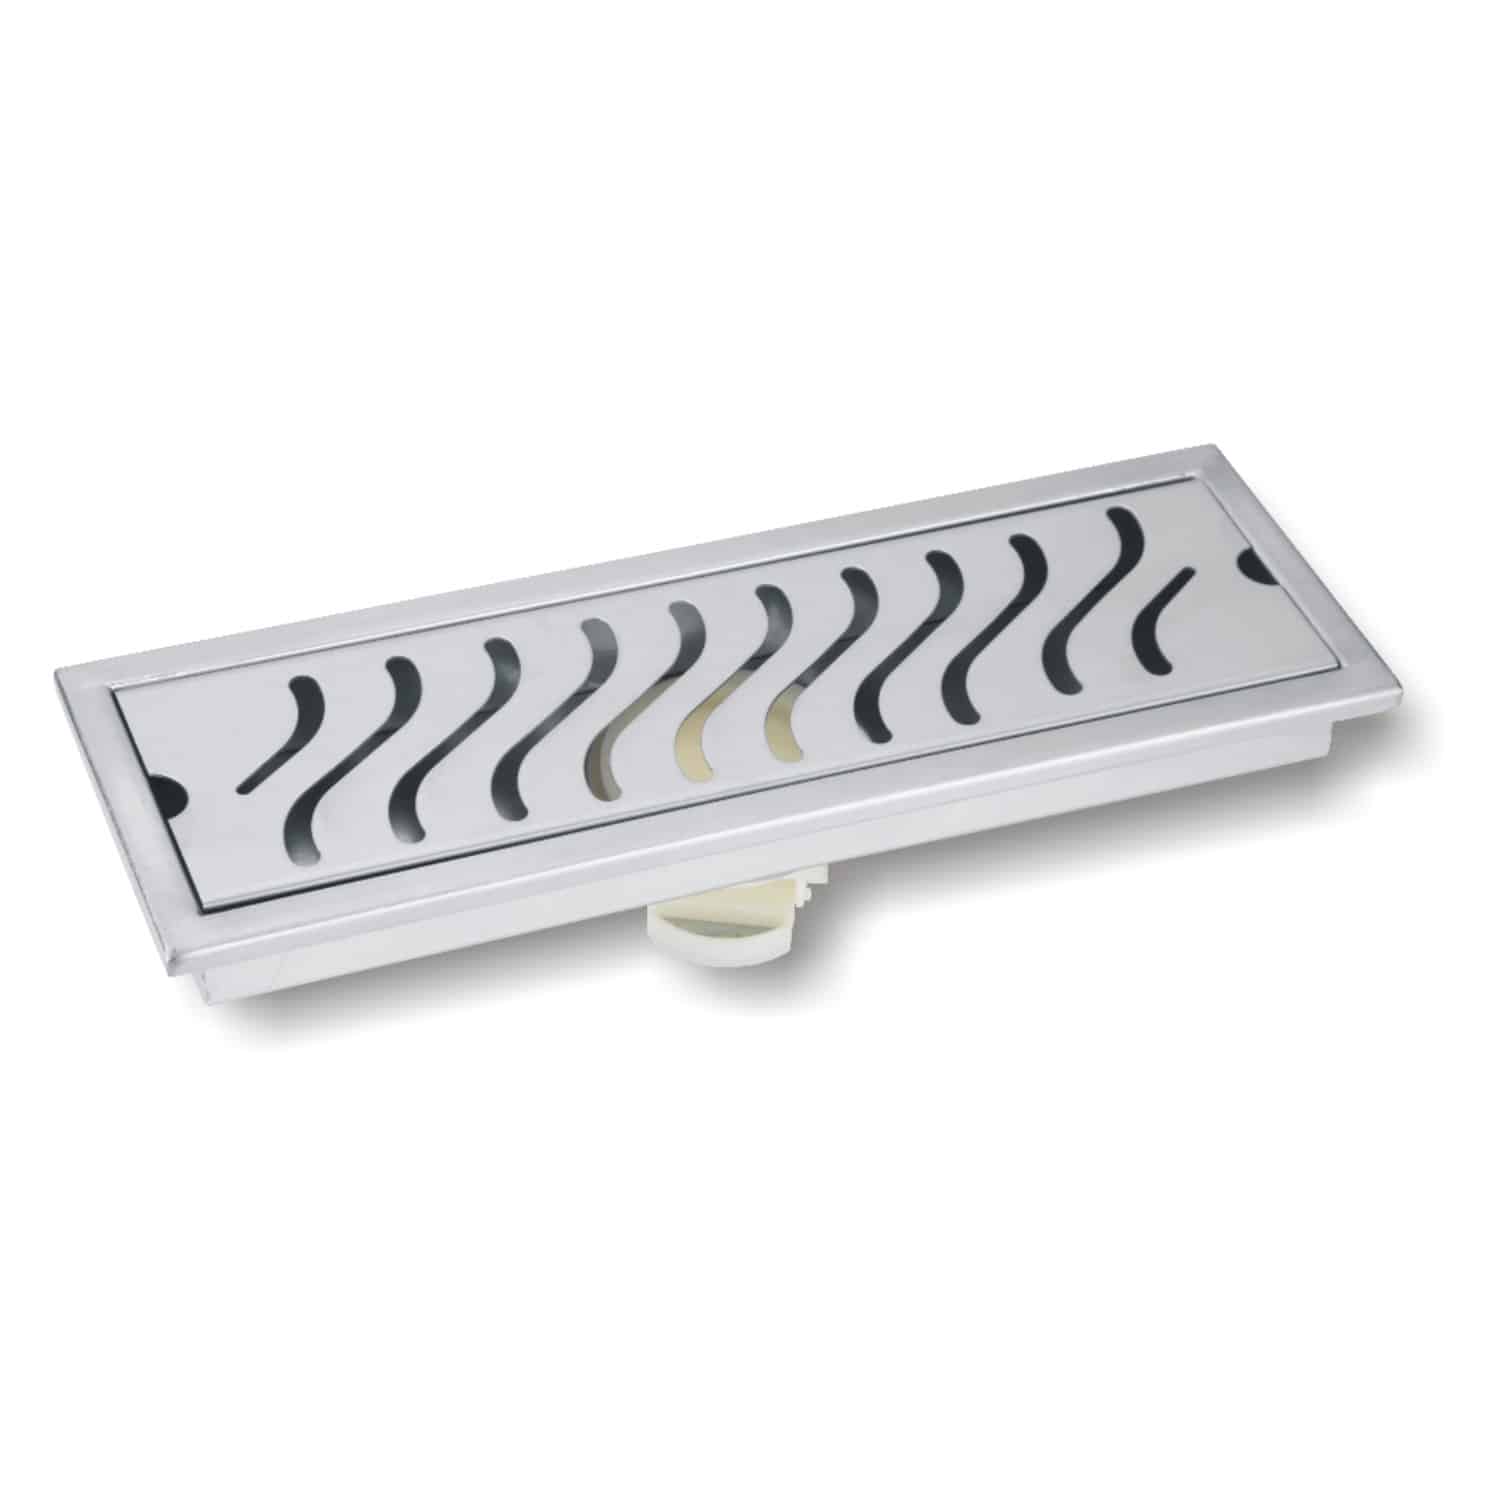 Goeka Shower drainer, drain channel, drain cover and tile drainer